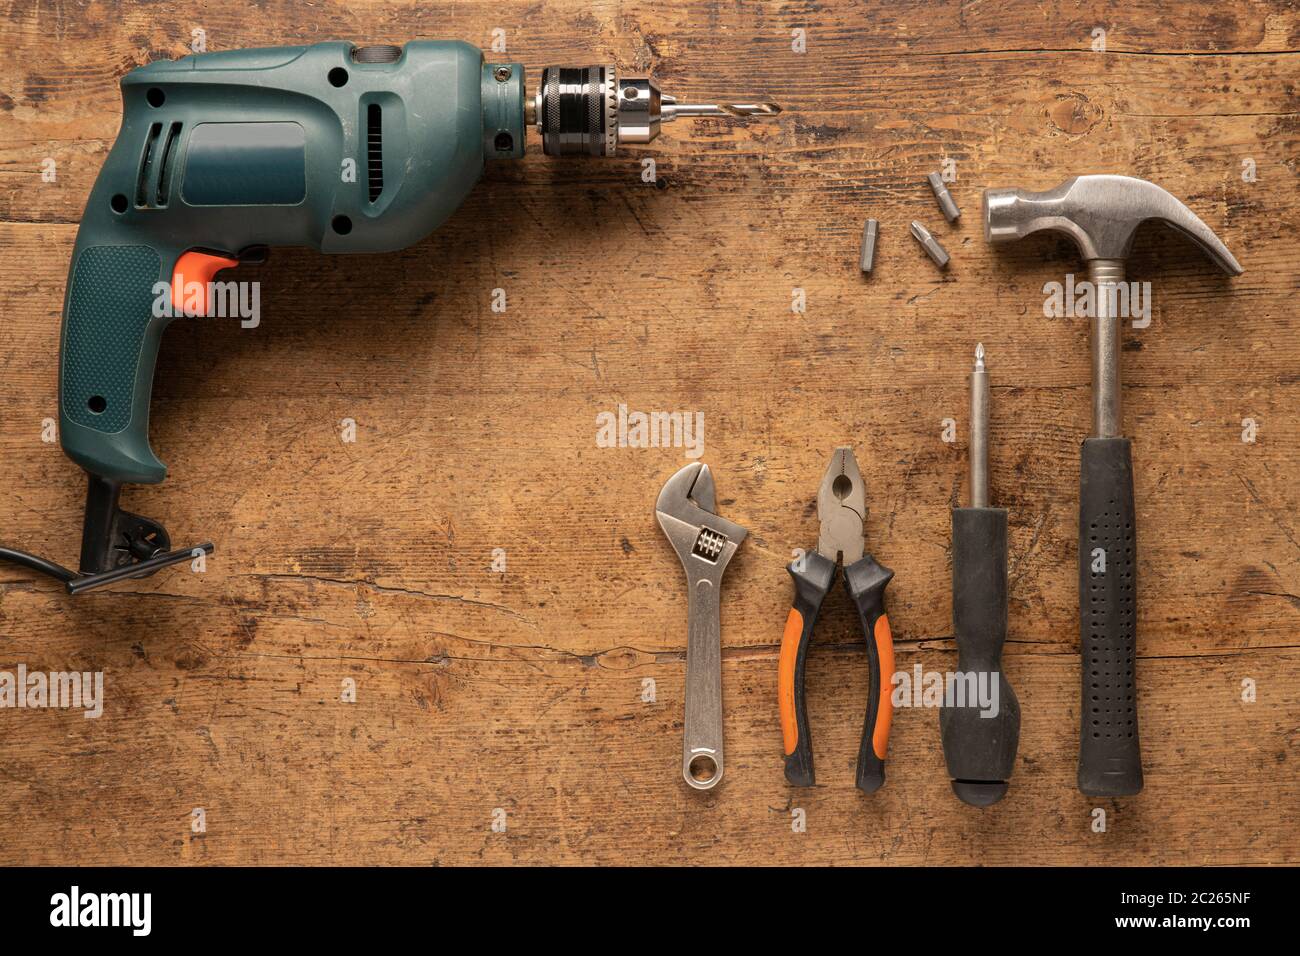 Drill and hand tools on a wooden vintage background Stock Photo - Alamy